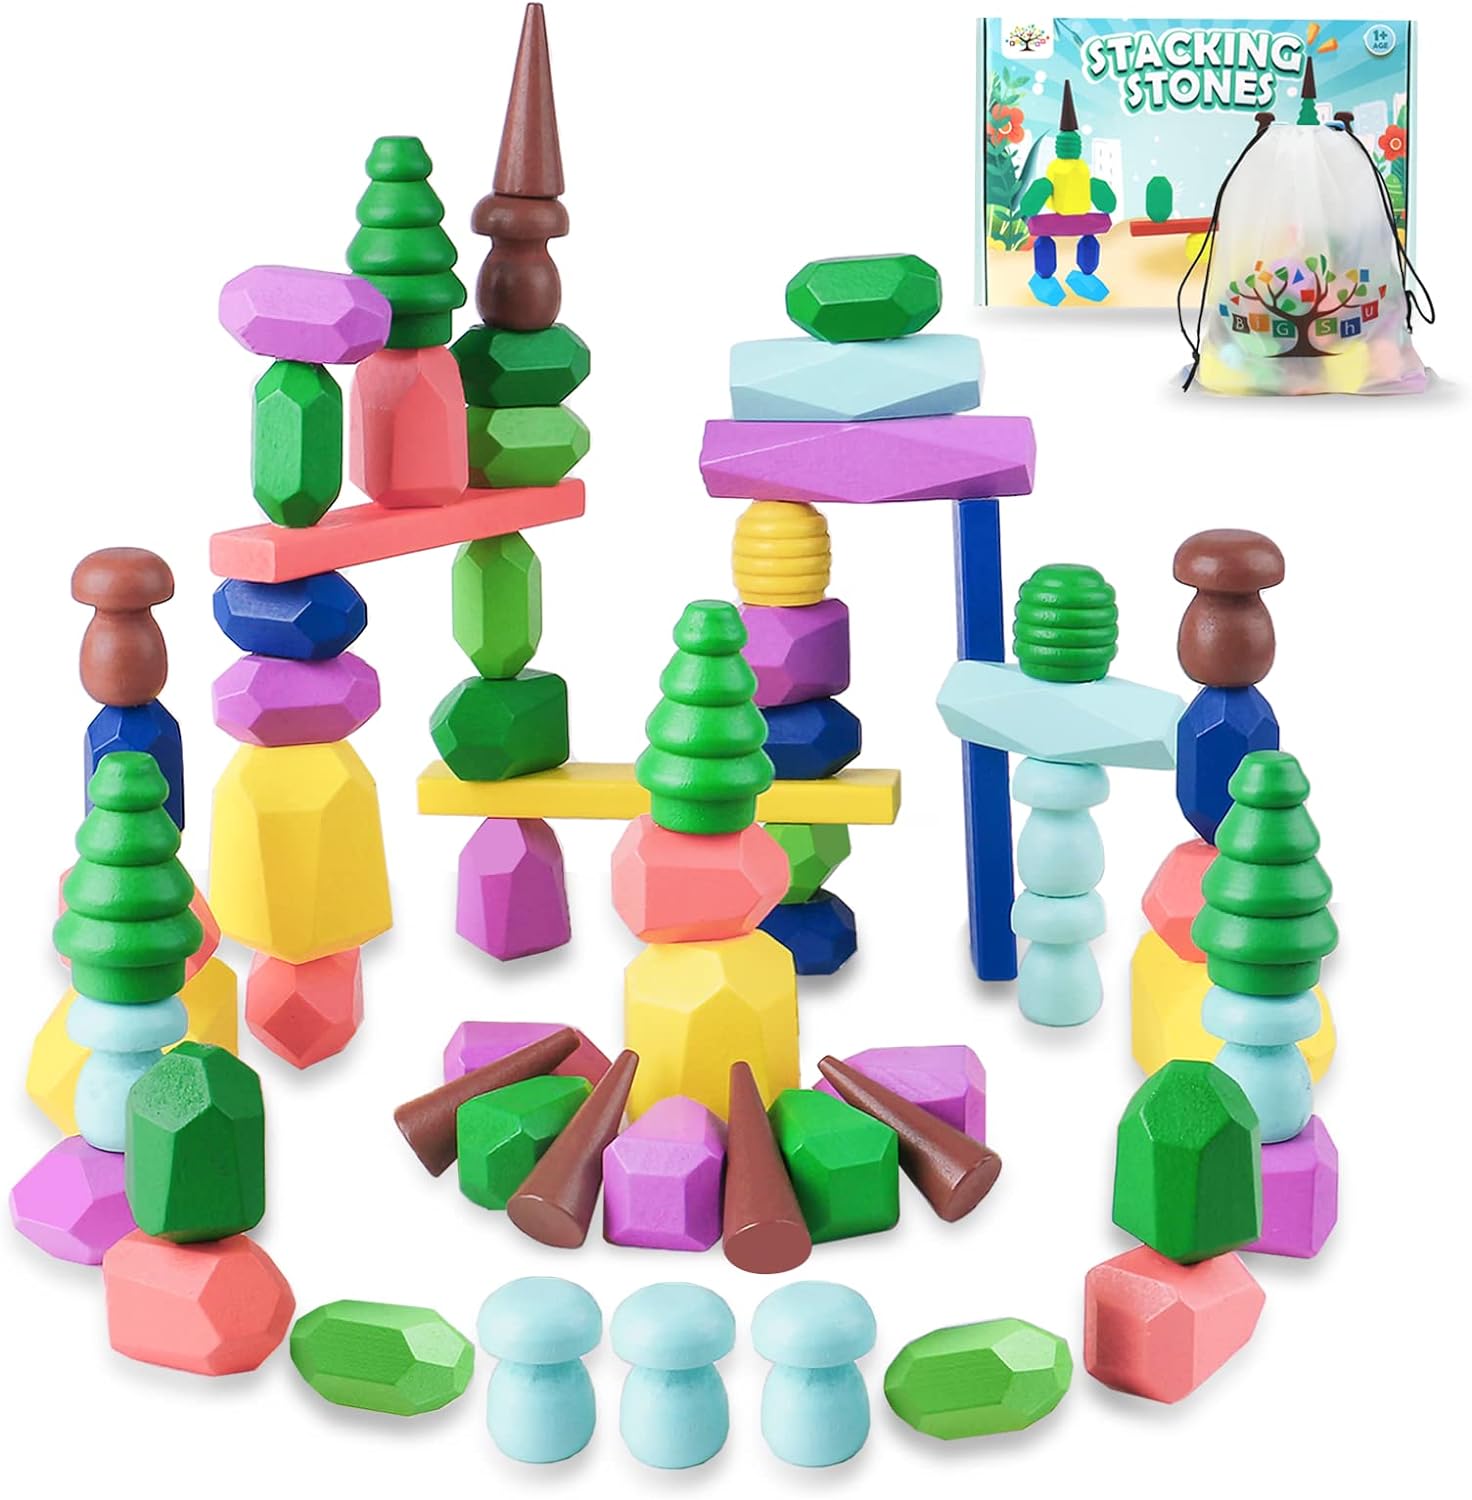 Toys for 3 Year Old Boys Girls, 36 PCS Colorful Wooden Sorting Stacking Rocks, Sensory Toys for Toddlers 3-4 Montessori Building Blocks for Kids Ages 4-8, Preschool Learning Activities for Home School : Toys Games